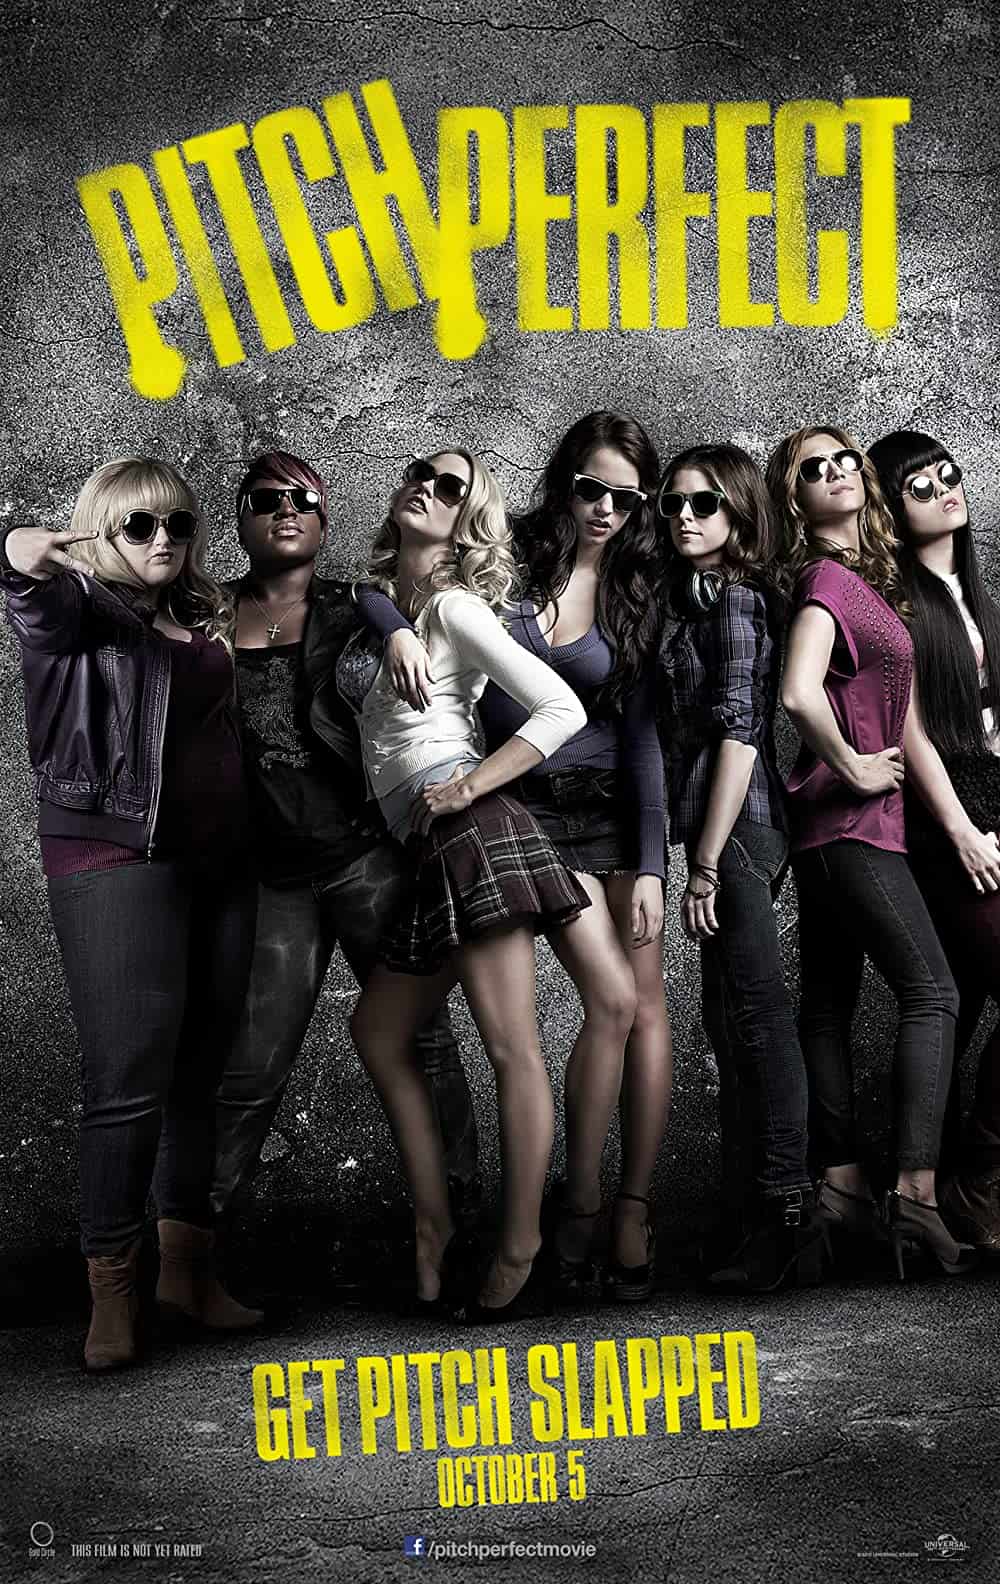 Pitch Perfect ( 2012) Comedy Movies You Can't Miss